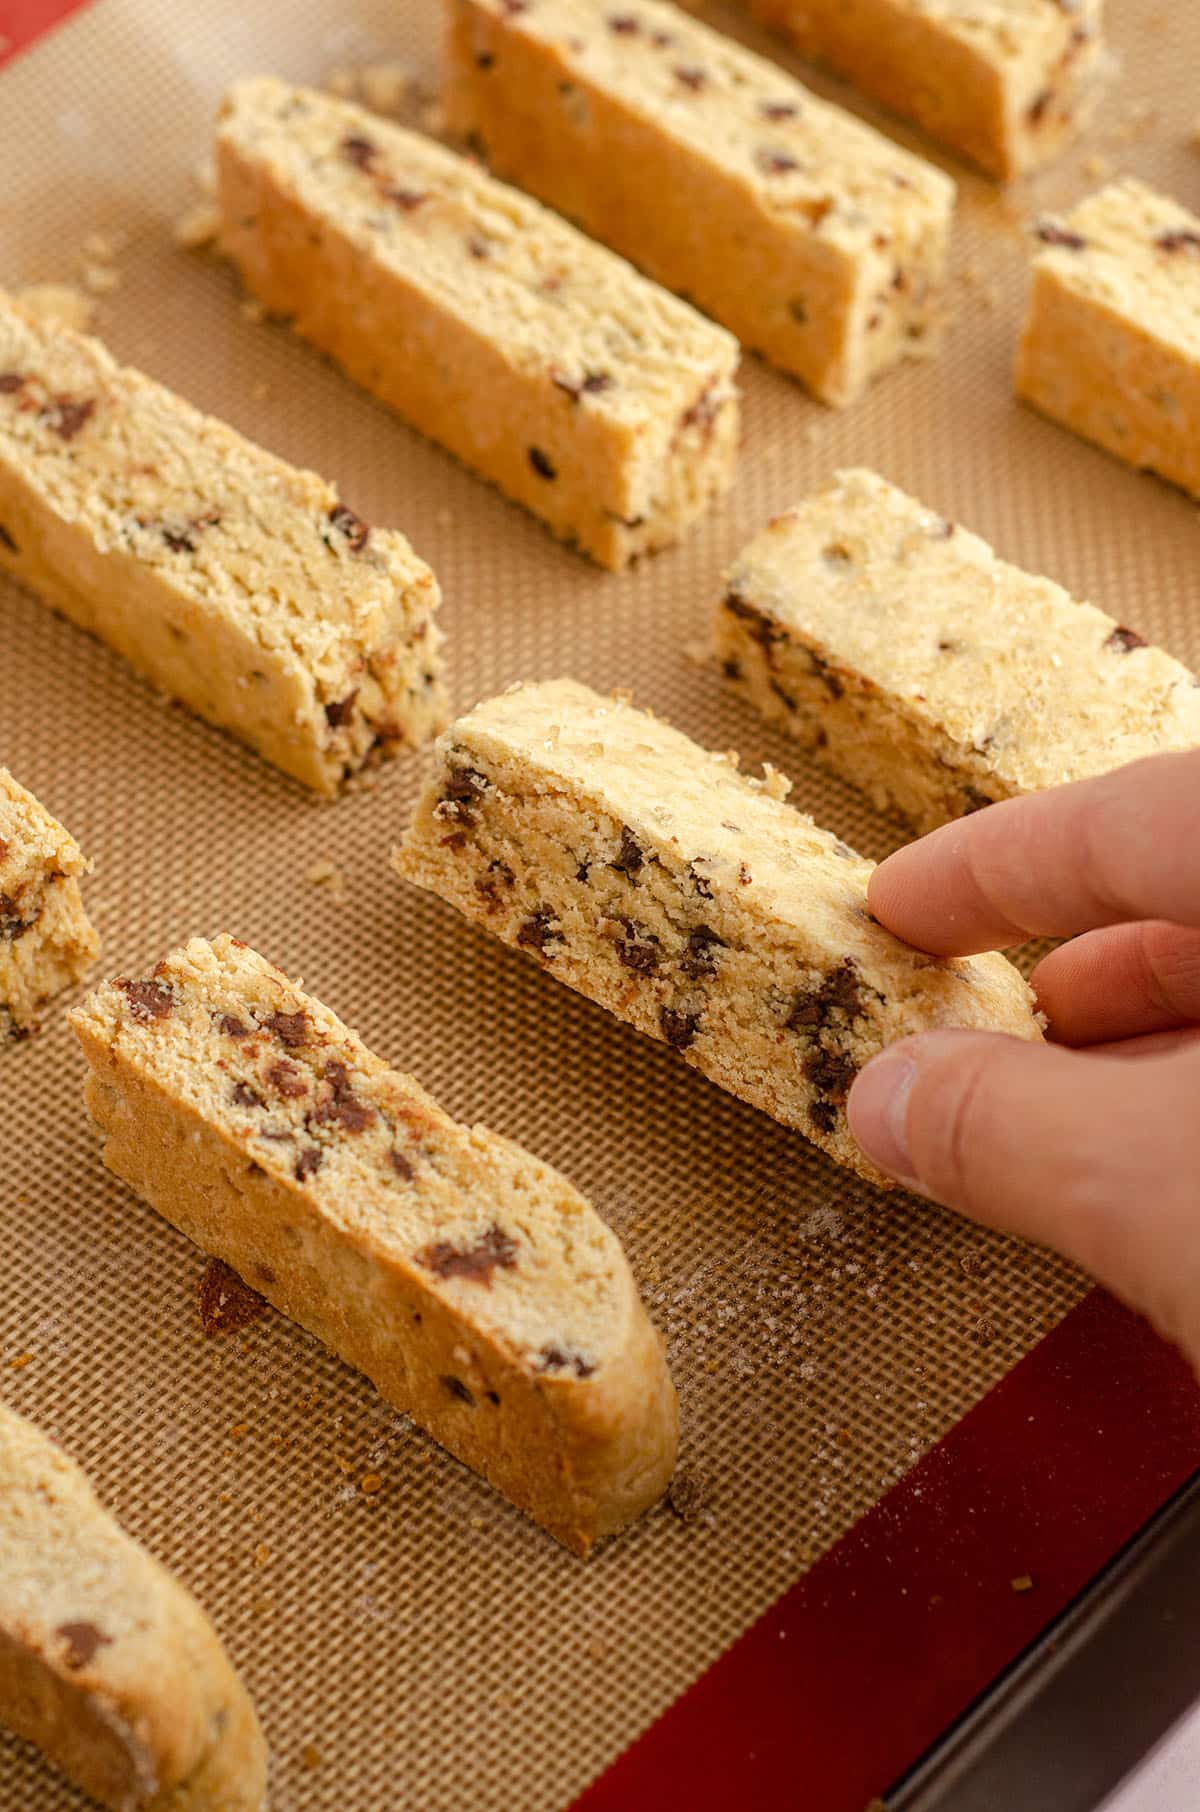 hand turning chocolate chip biscotti over on baking sheet to bake